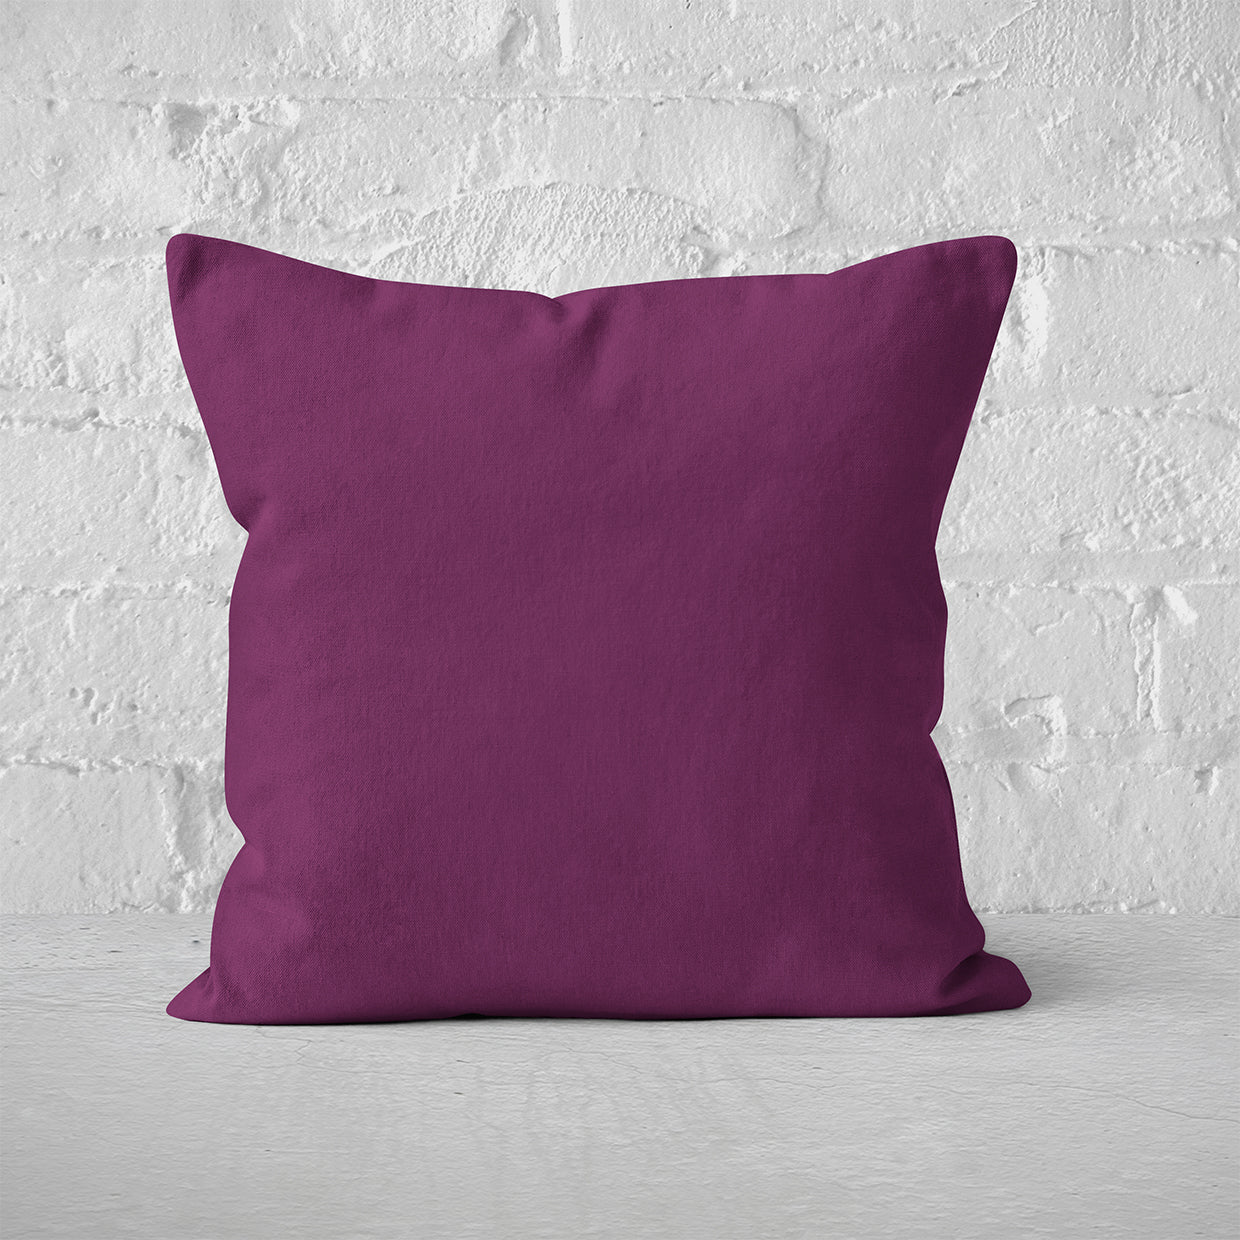 Pillow Cover Art Feature 'Solid' - Burgundy - Cotton Twill